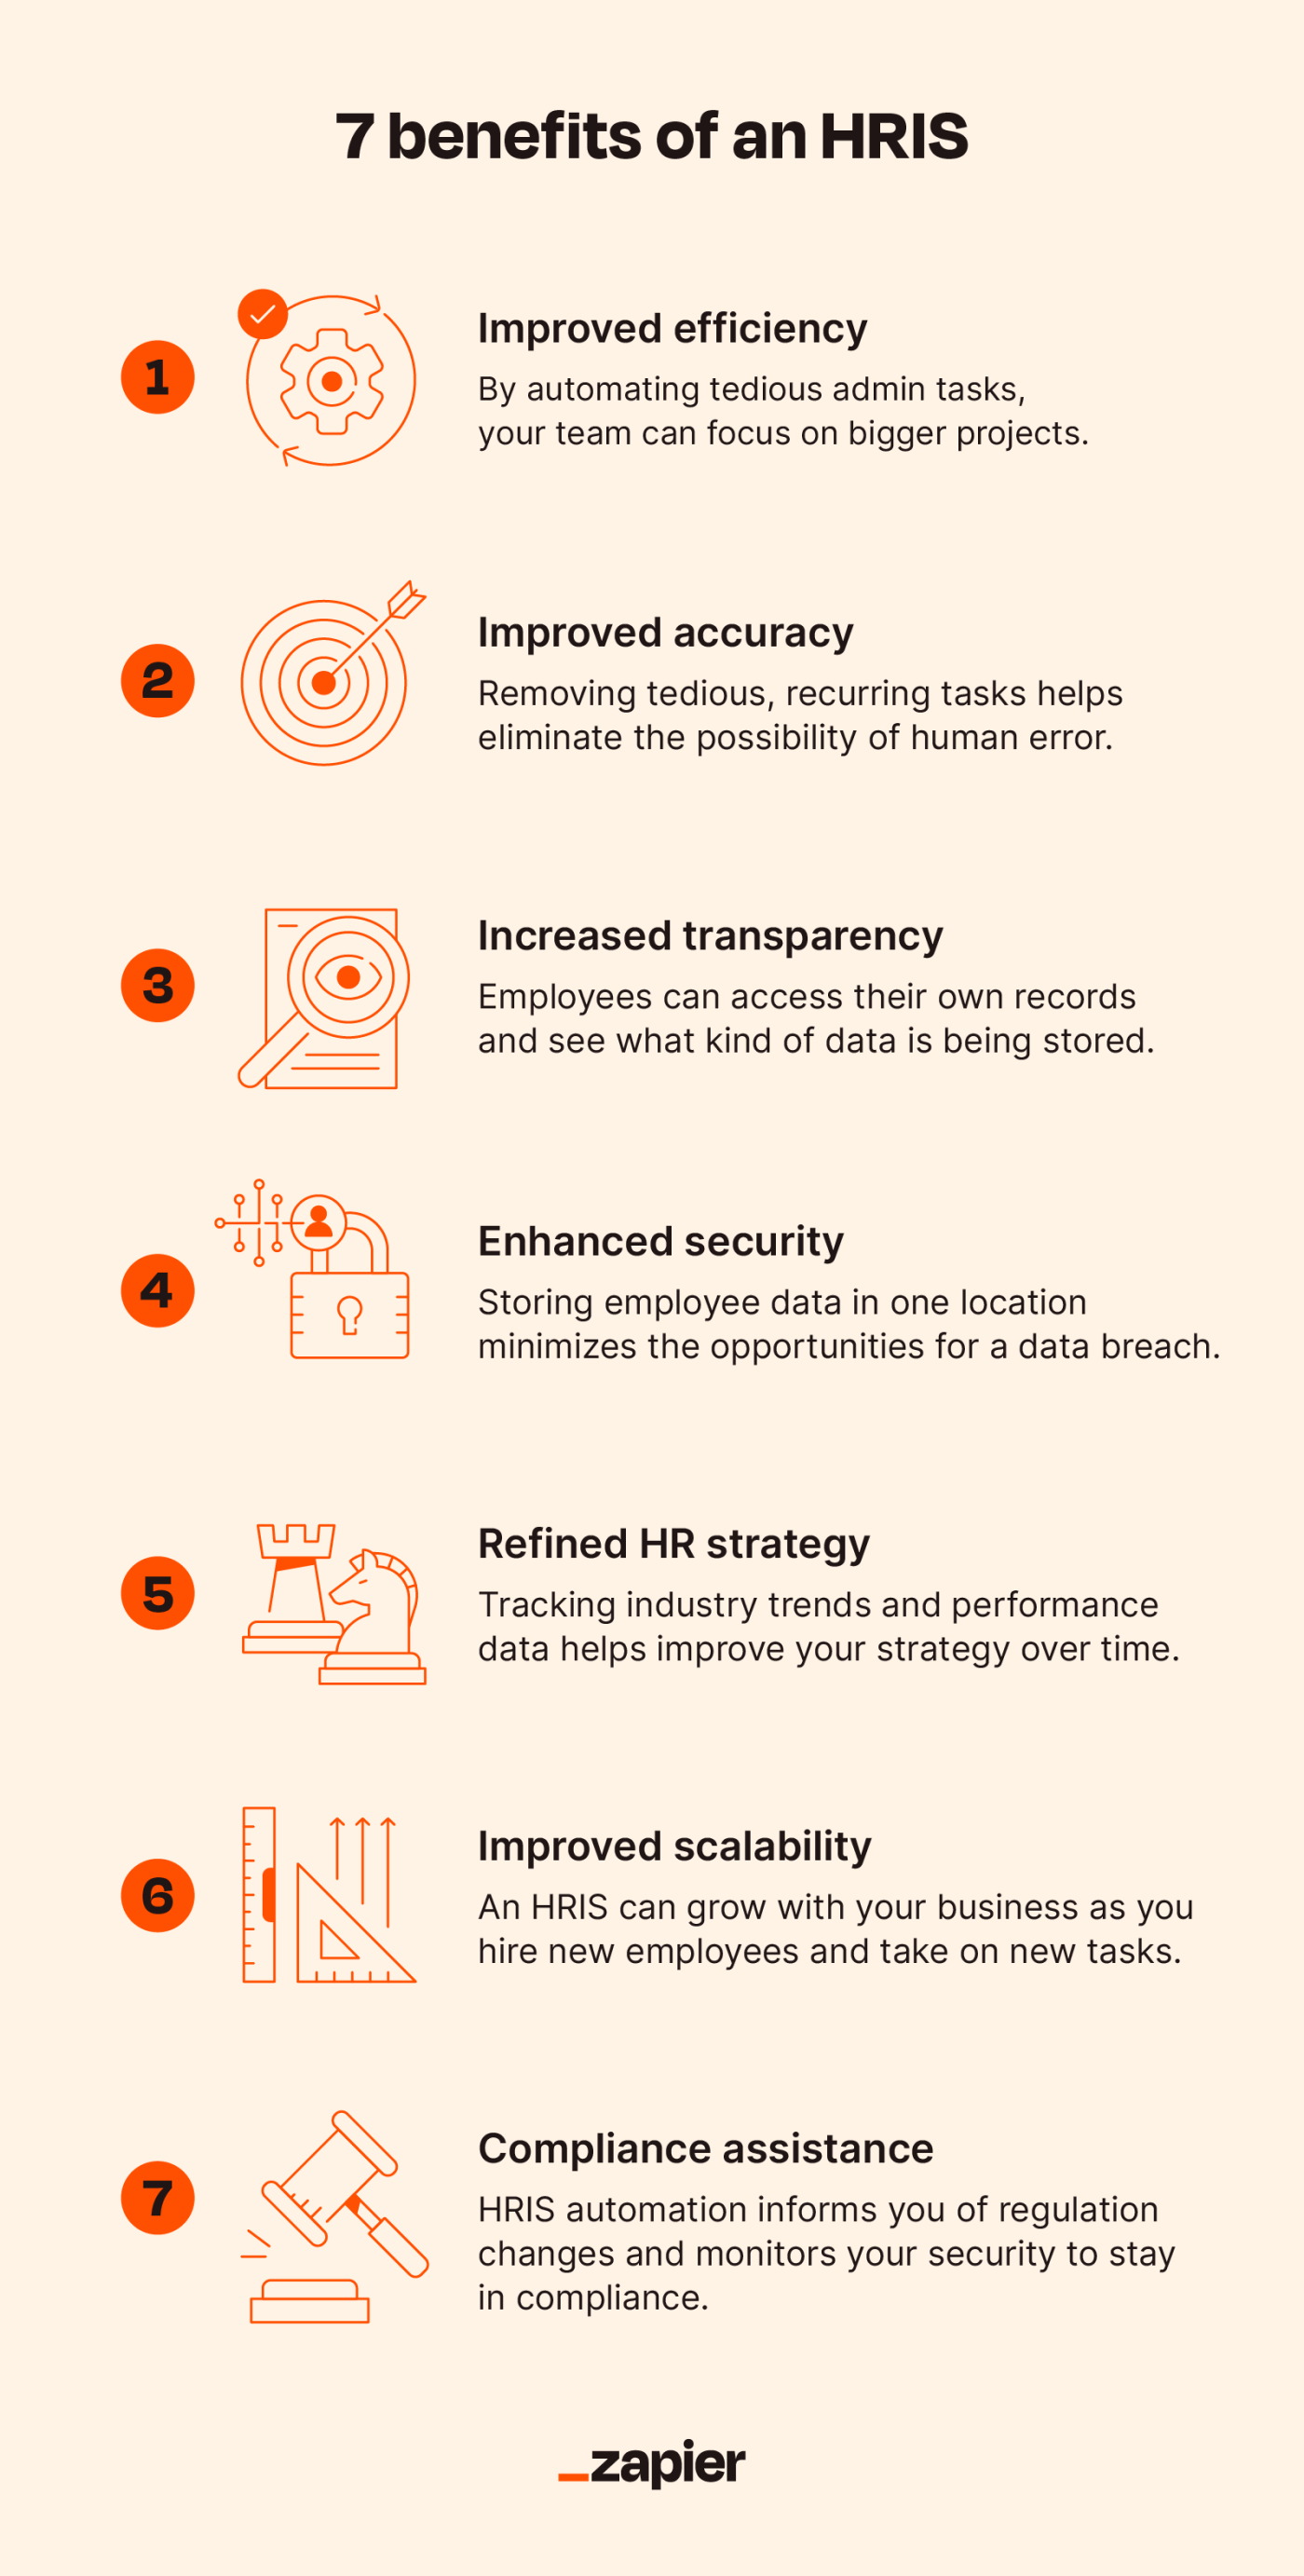 Orange icons demonstrating the four benefits of HRIS including improved efficiency and accuracy, increased transparency, enhanced security, refined HR strategy, improved scalability, and compliance assistance  